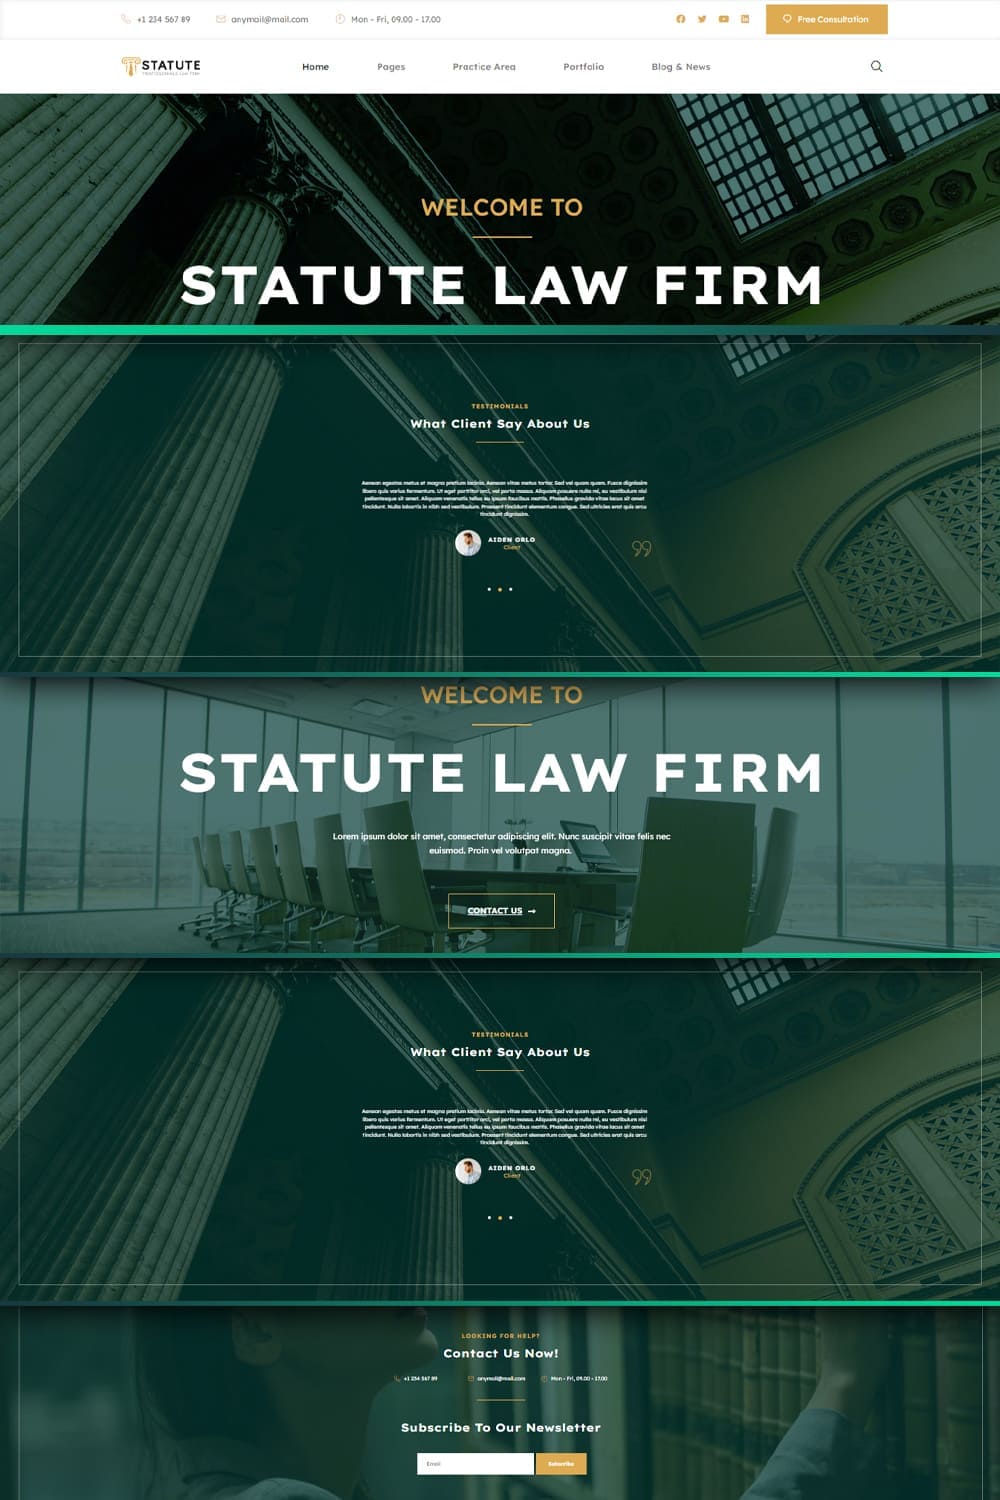 Statute law firm attorney elementor template kit, image for pinterest 1000x1500.